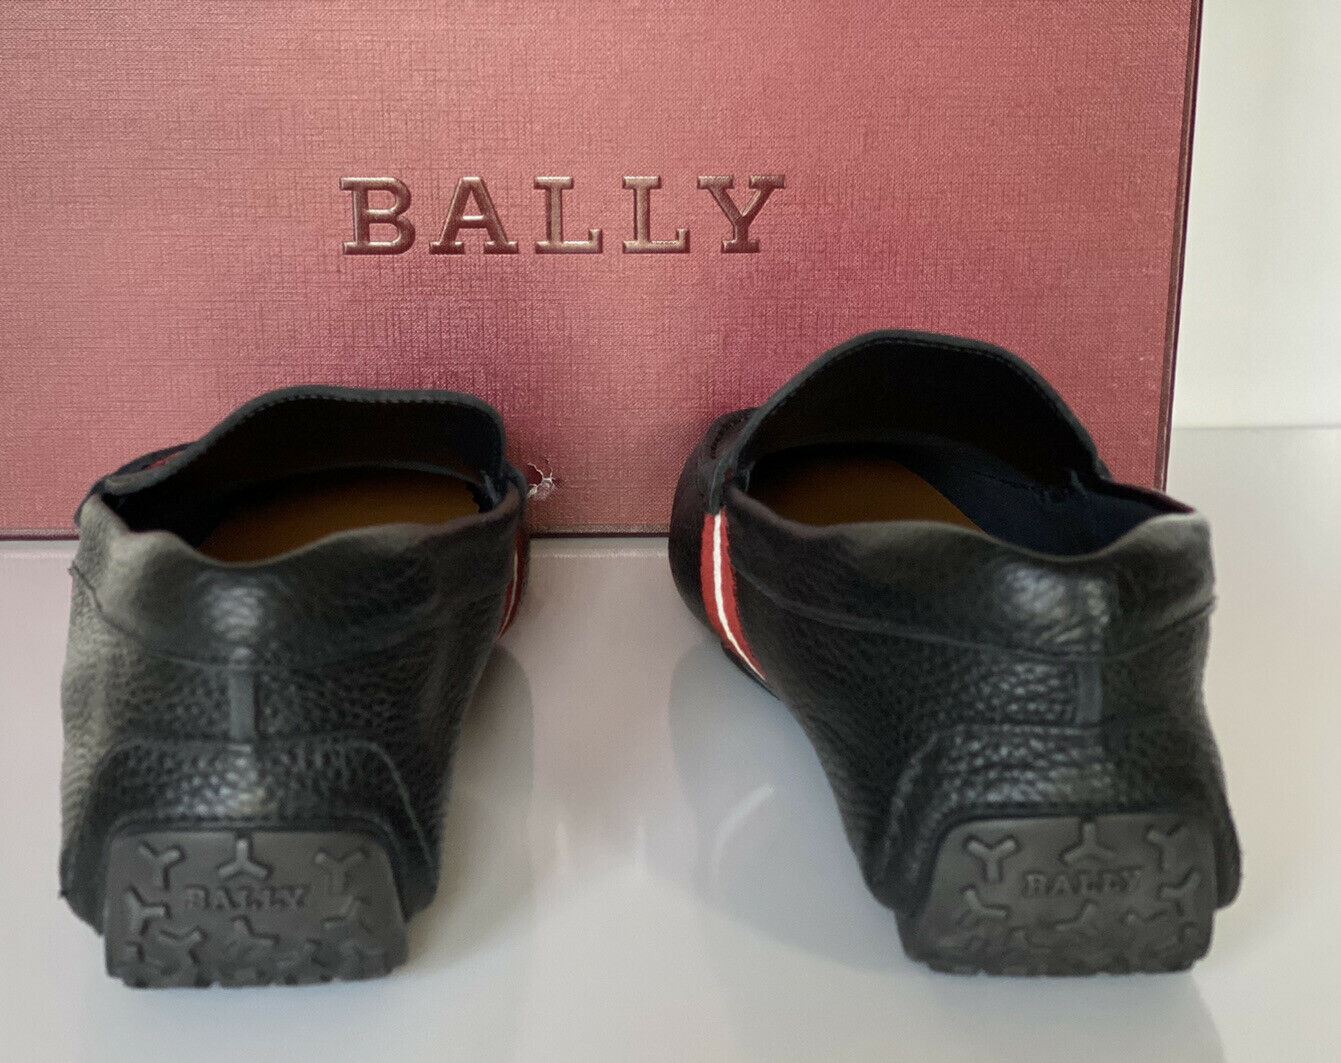 NIB Bally Mens Bovine Grained Leather Driver Shoes Black 10 D US 6228298 Italy